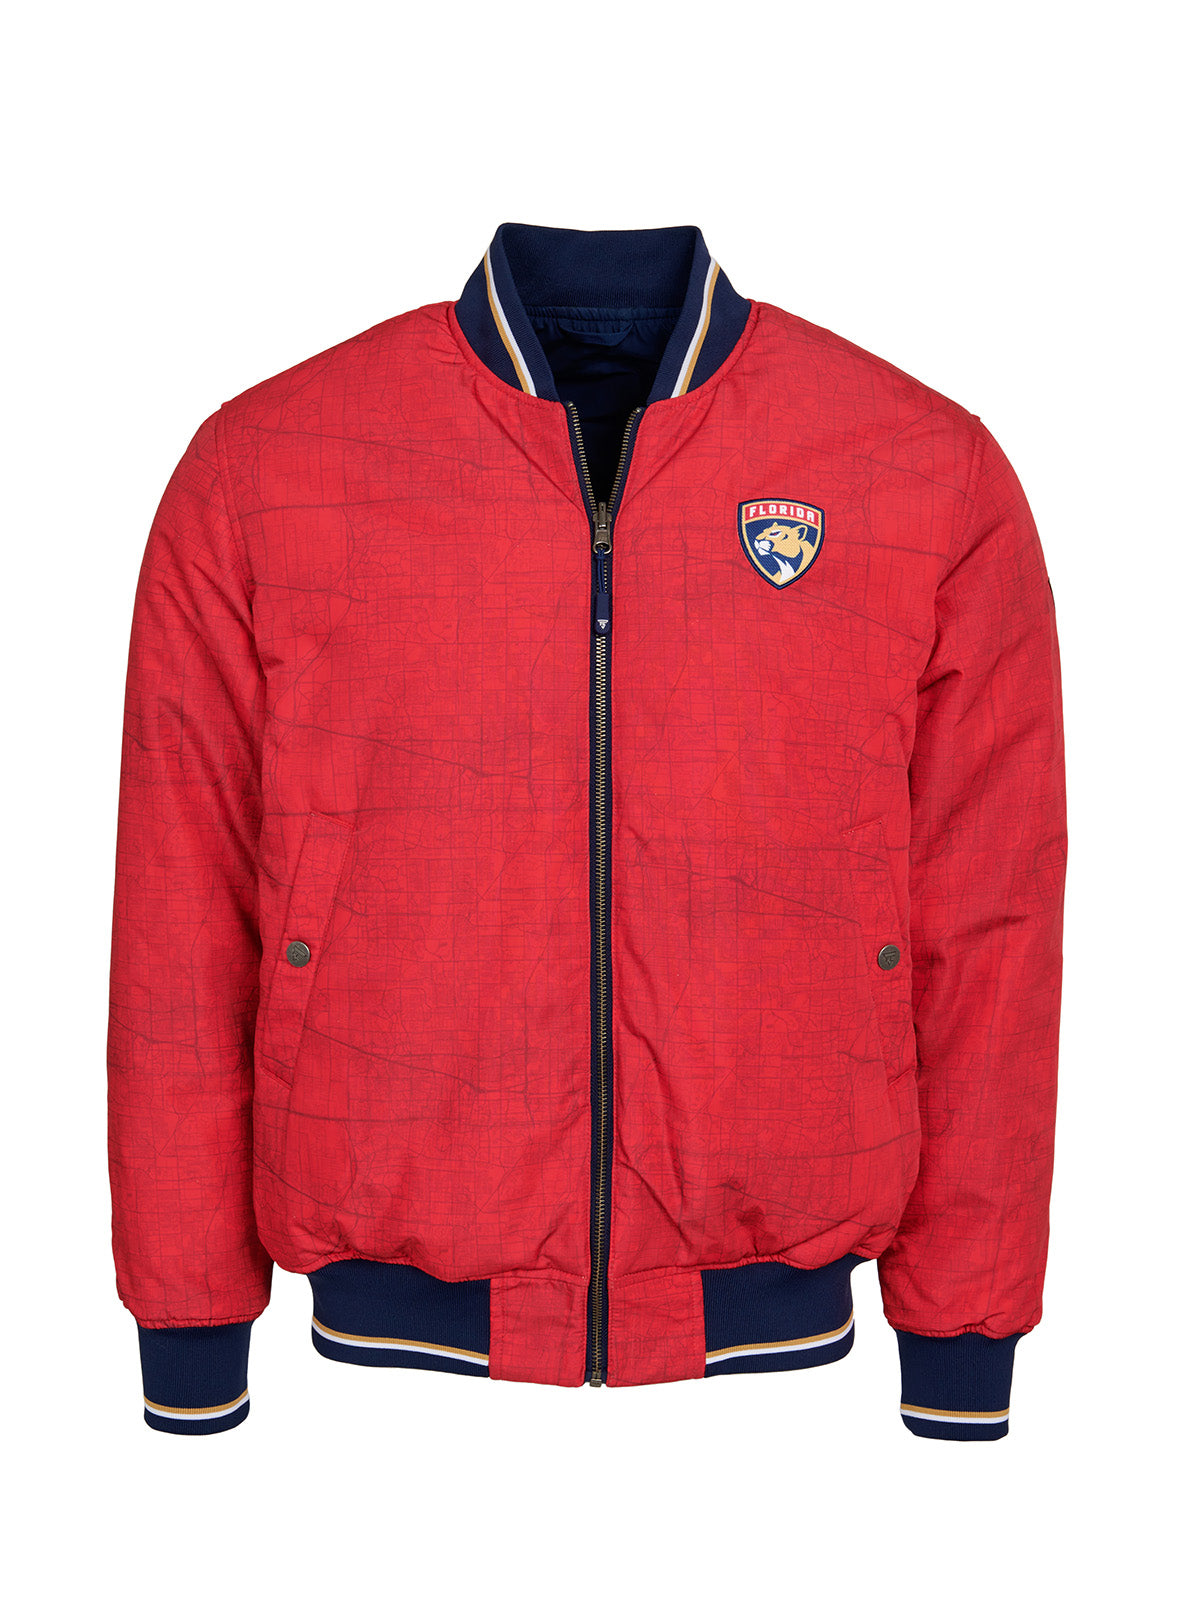 Florida Panthers Bomber - Reversible bomber jacket featuring the iconic Florida Panthers logo with ribbed cuffs, collar and hem in the team colors